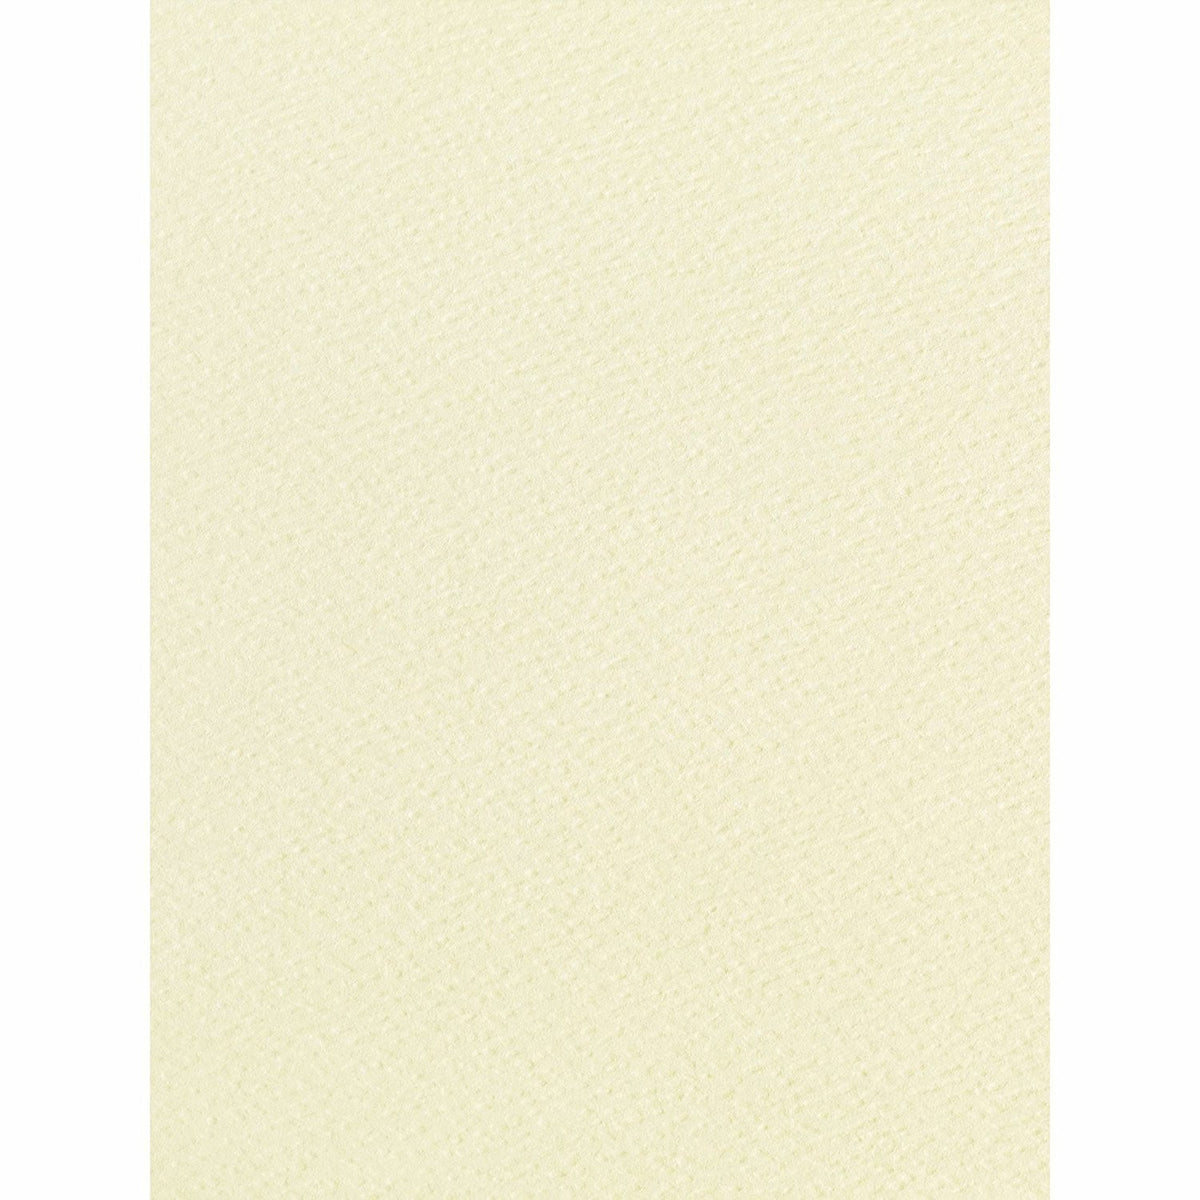 A4 Sheets Ivory Hammered Paper Textured 120gsm Suitable for Inkjets and Laser Printers (100)